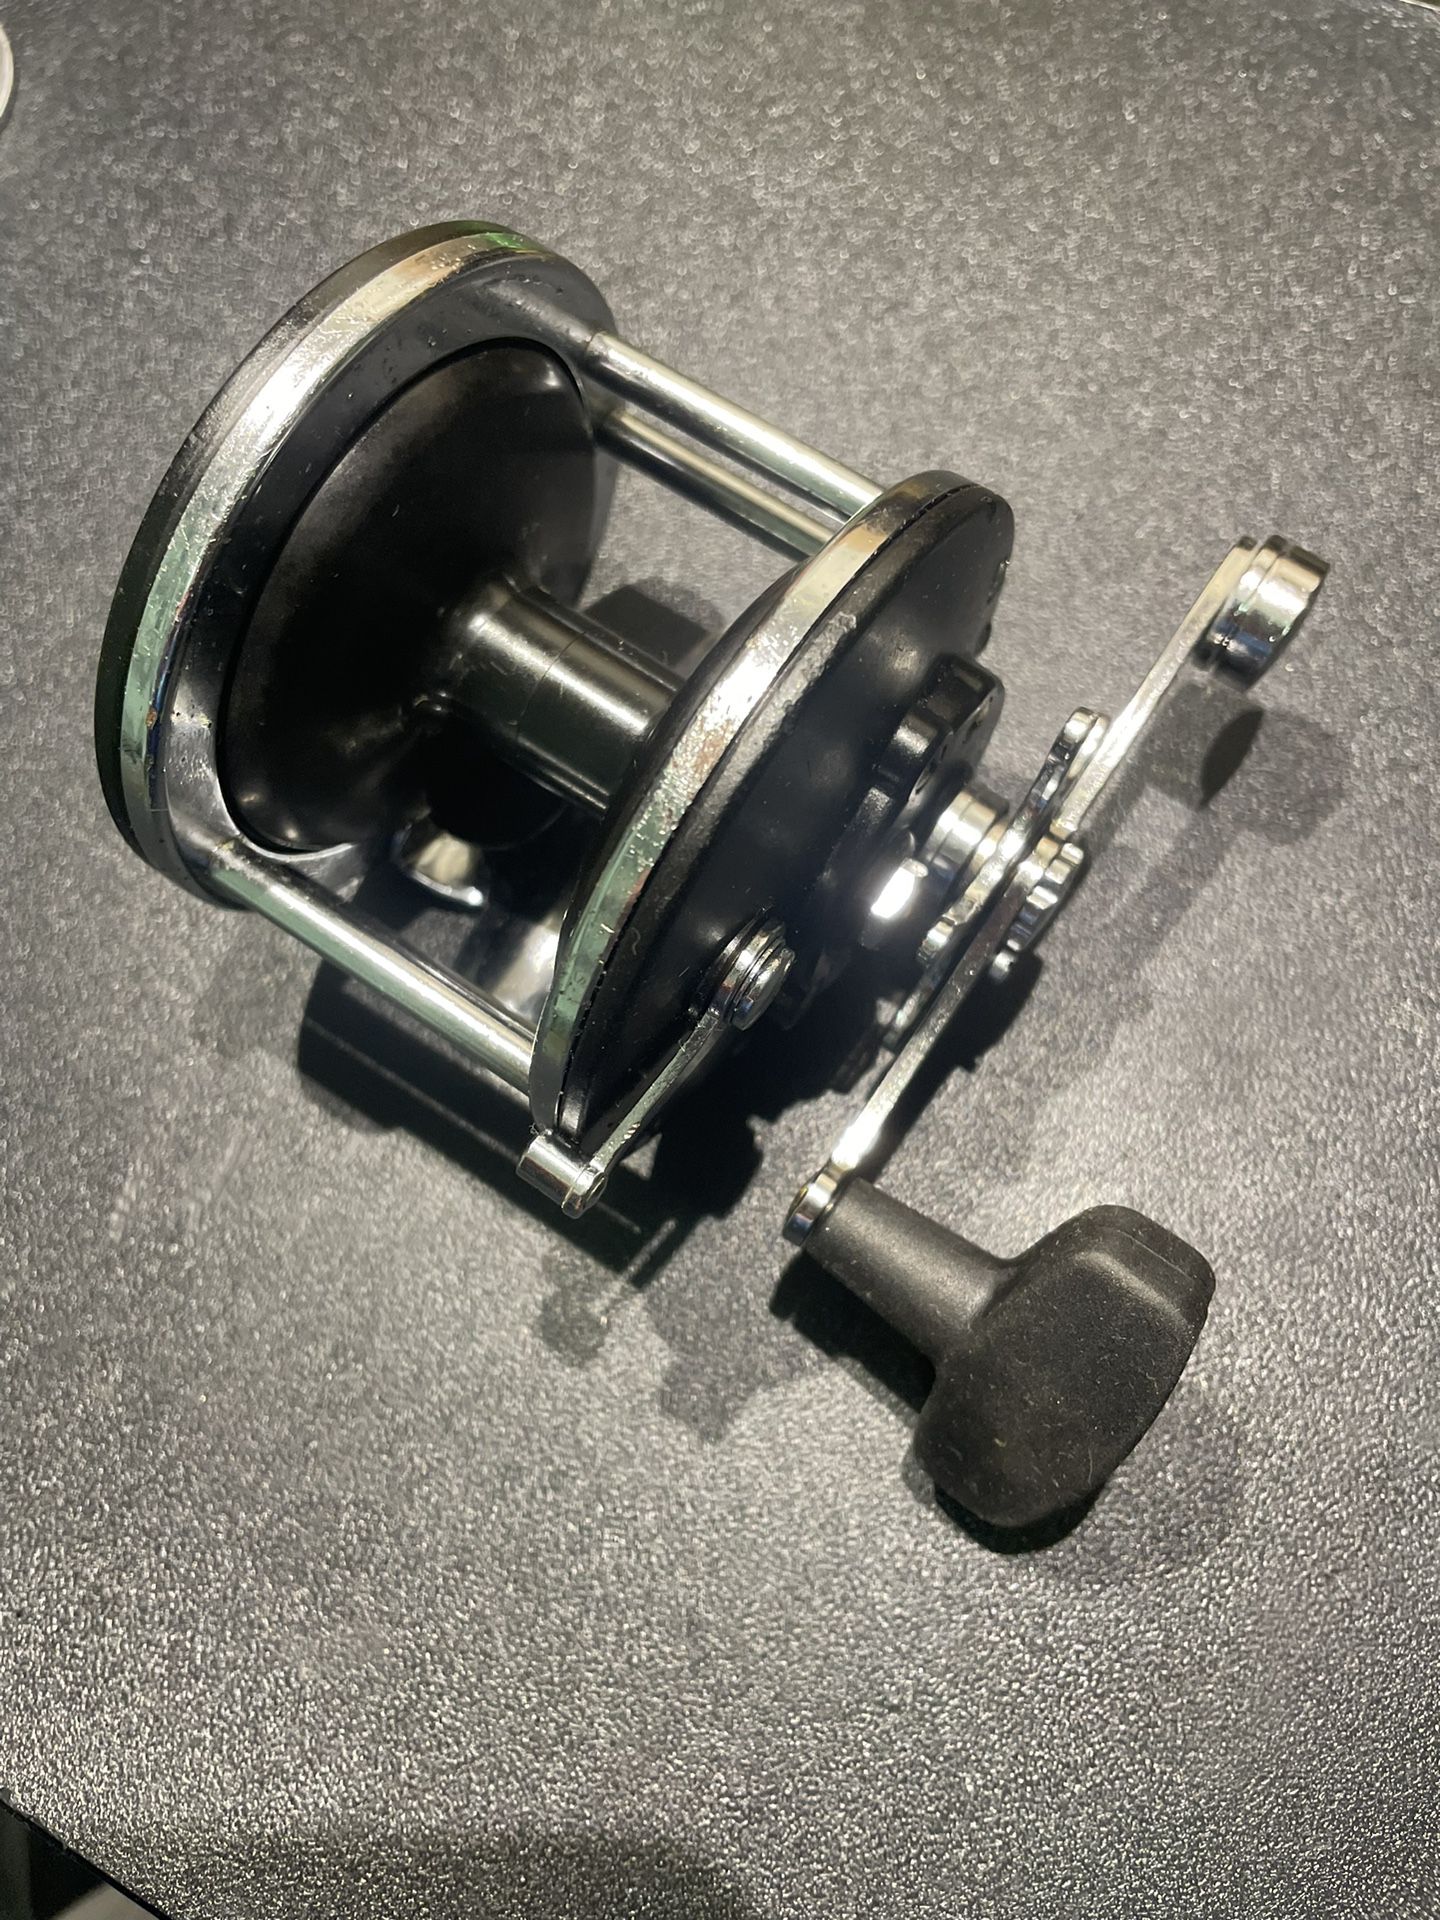 Penn Long Beach 60 Fishing Reel With Light Weight Spool - Cleaned And Serviced